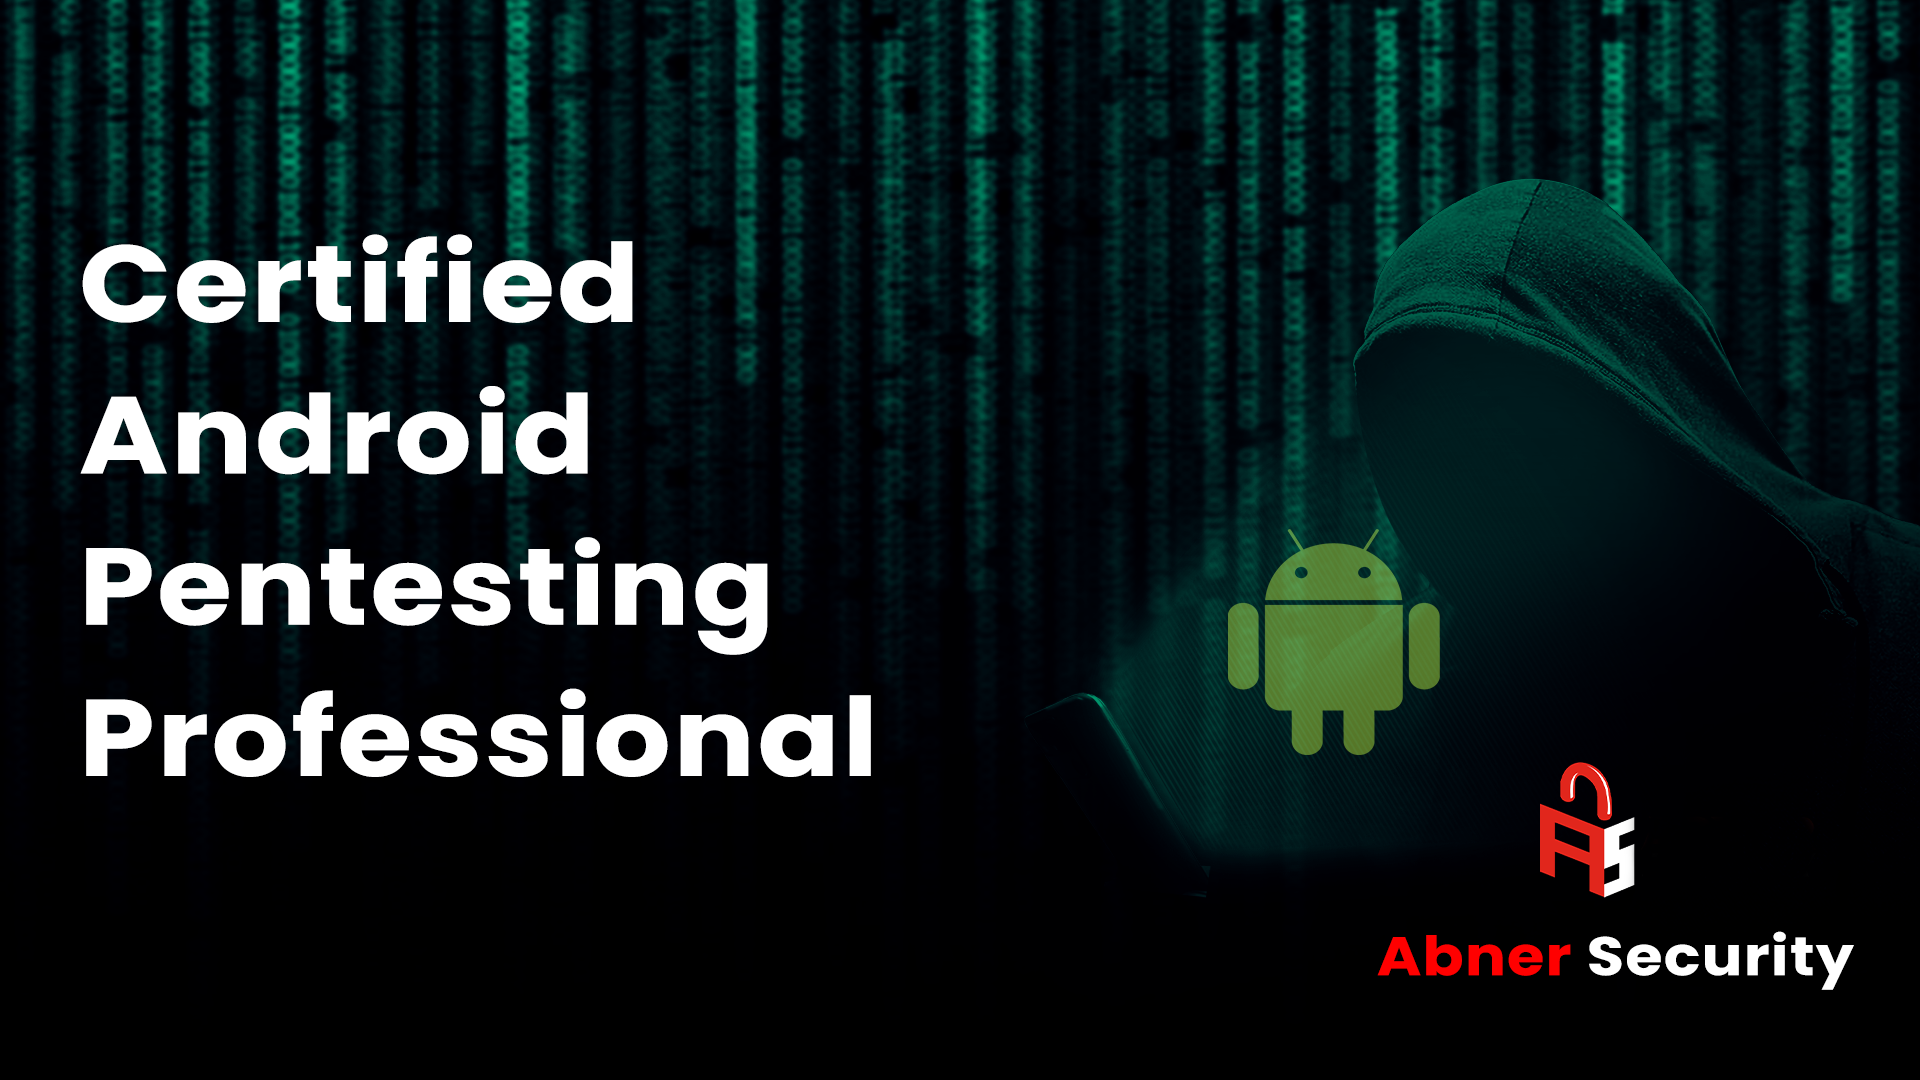 ABNERSECURITY CERTIFIED ANDROID PENTESTING PROFESSIONAL